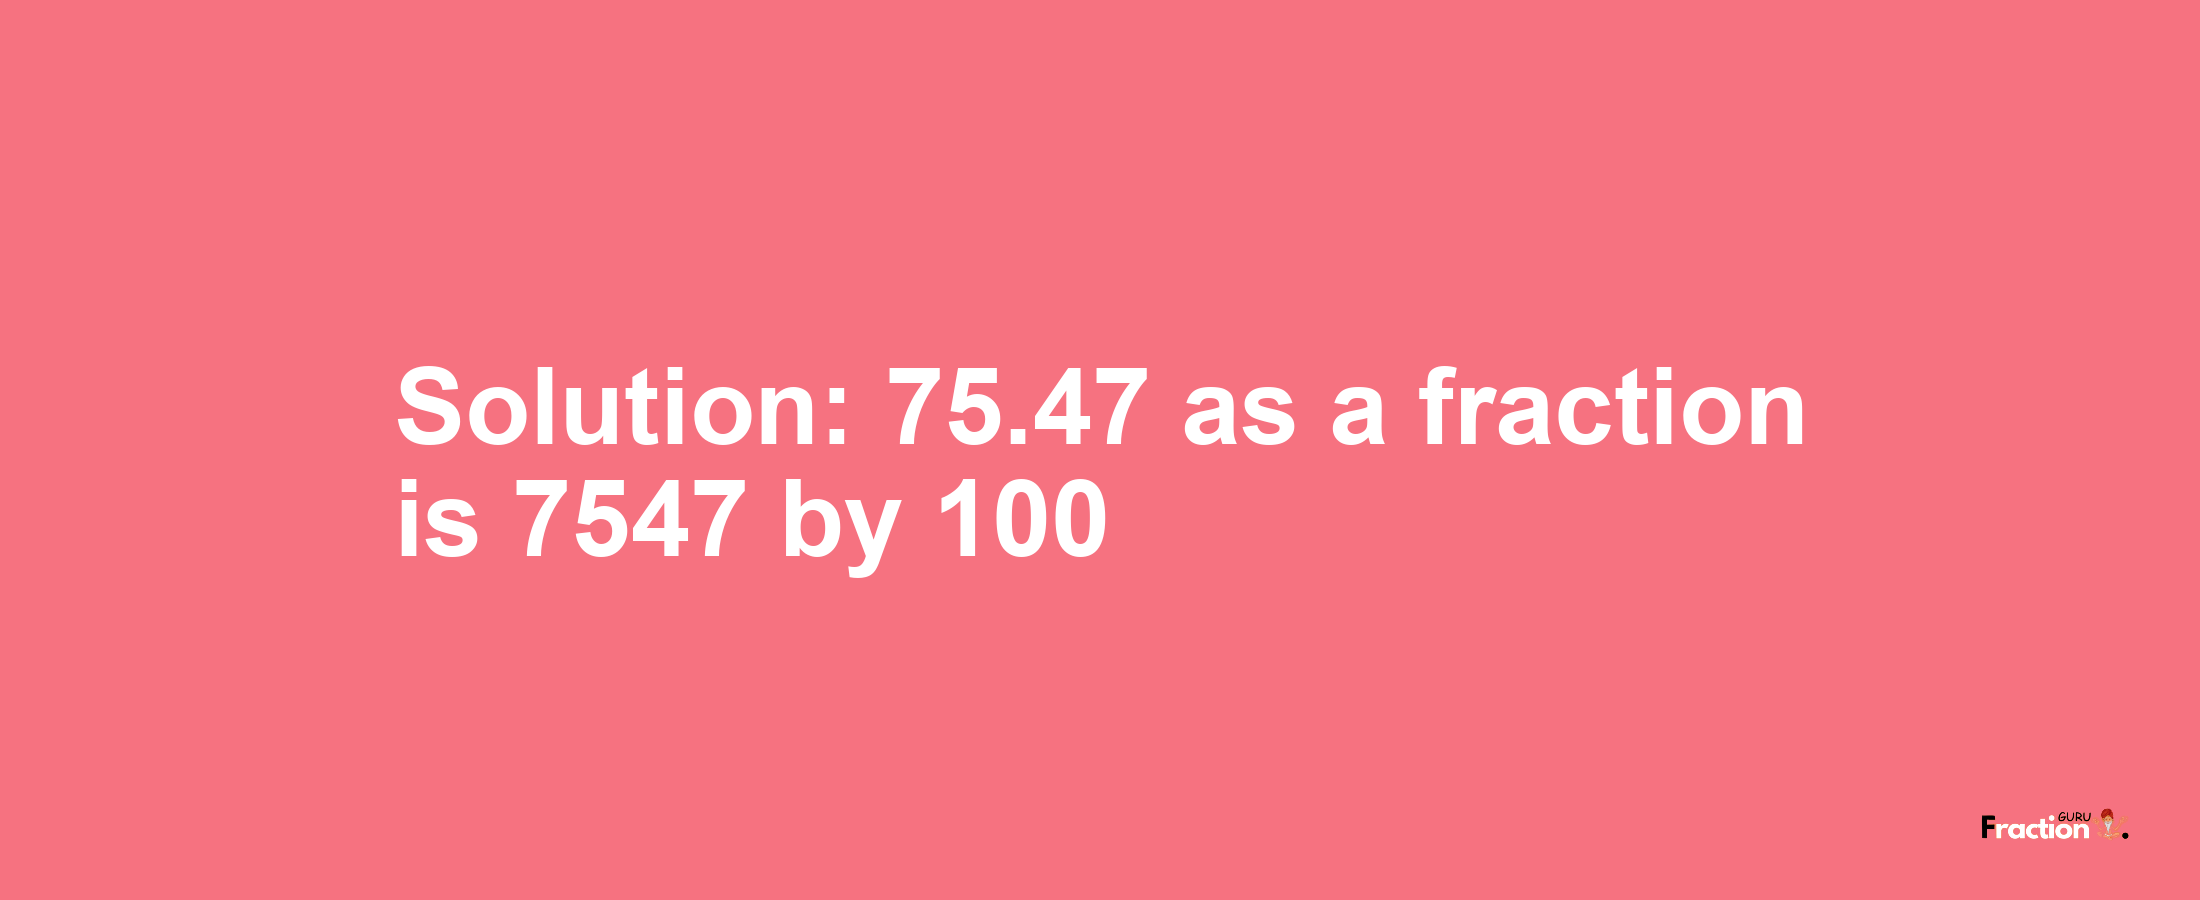 Solution:75.47 as a fraction is 7547/100